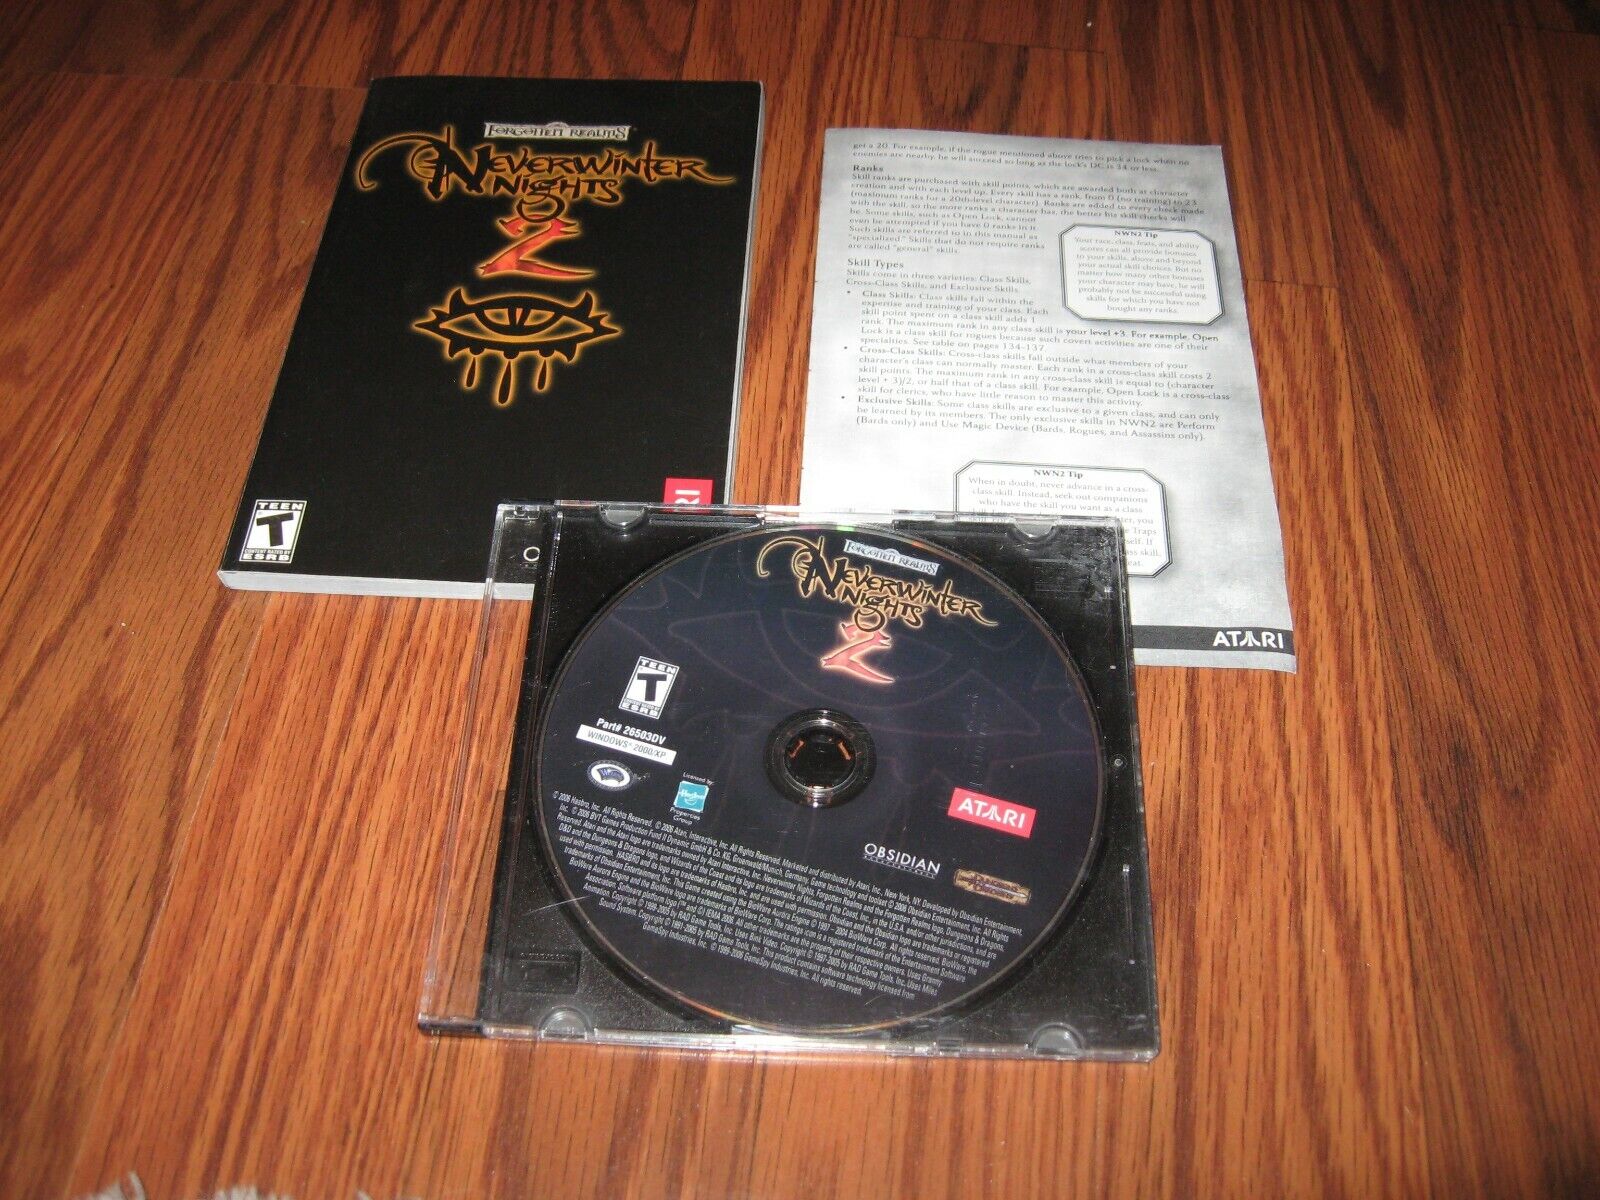 Neverwinter Nights 2 (PC, 2006) with manual